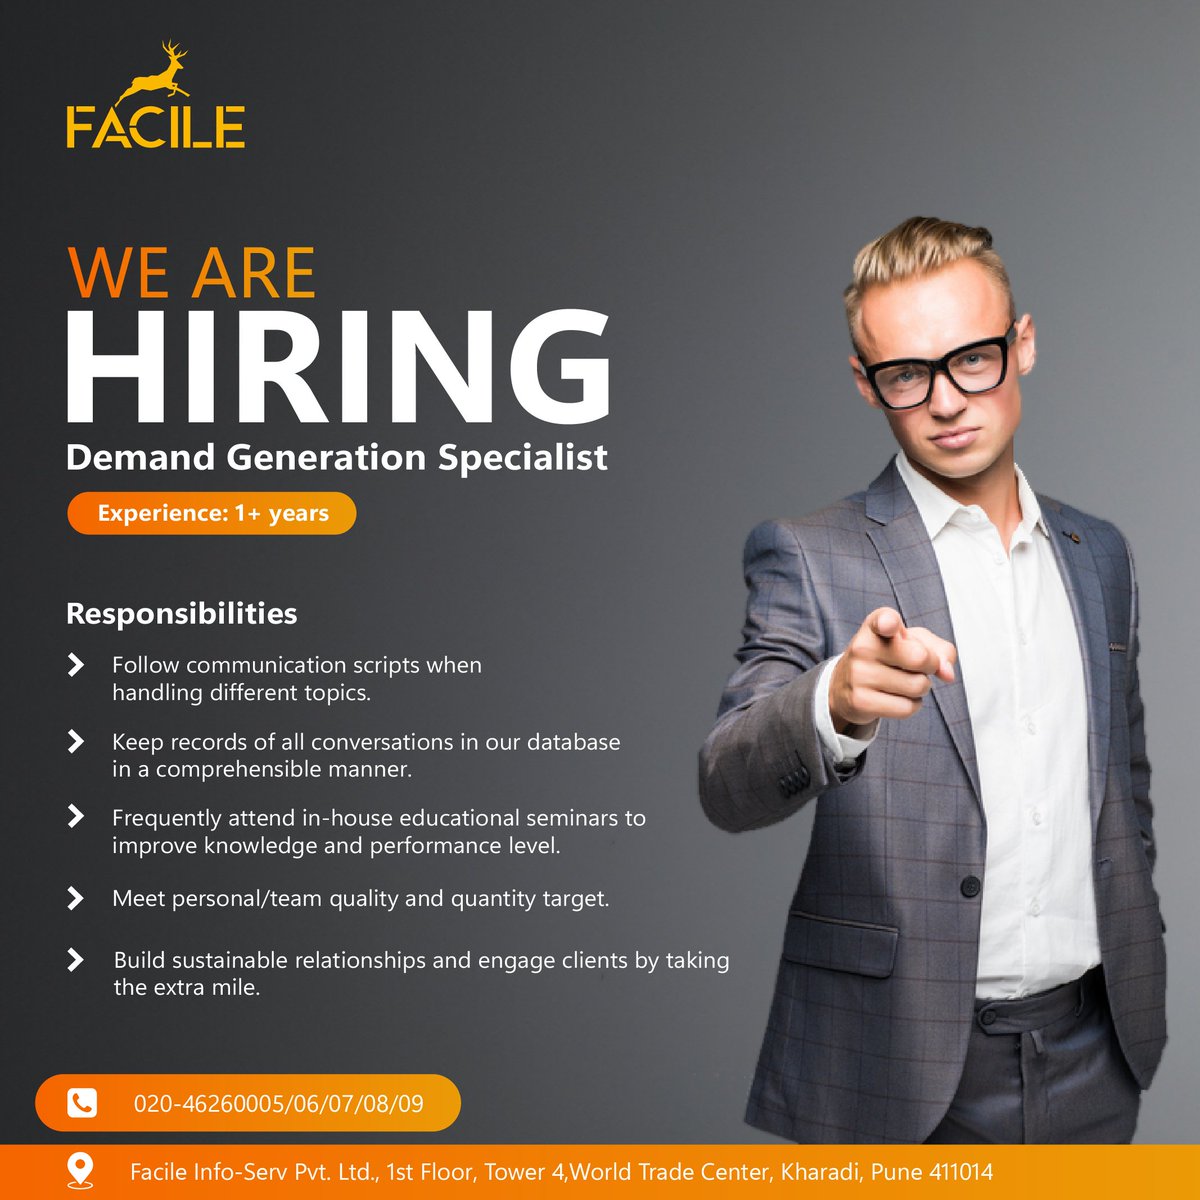 WE ARE HIRING

Position: Demand Generation Specialist  

Contact: 020-46260005/06/07/08/09

Send your updated CV at: careers@facileserv.com 
OR
Apply Here: facileserv.com/careers/

#punejobs #DGS #demadgenerationspecialist #jobposting #jobopening #jobalert #jobvacancies #facile